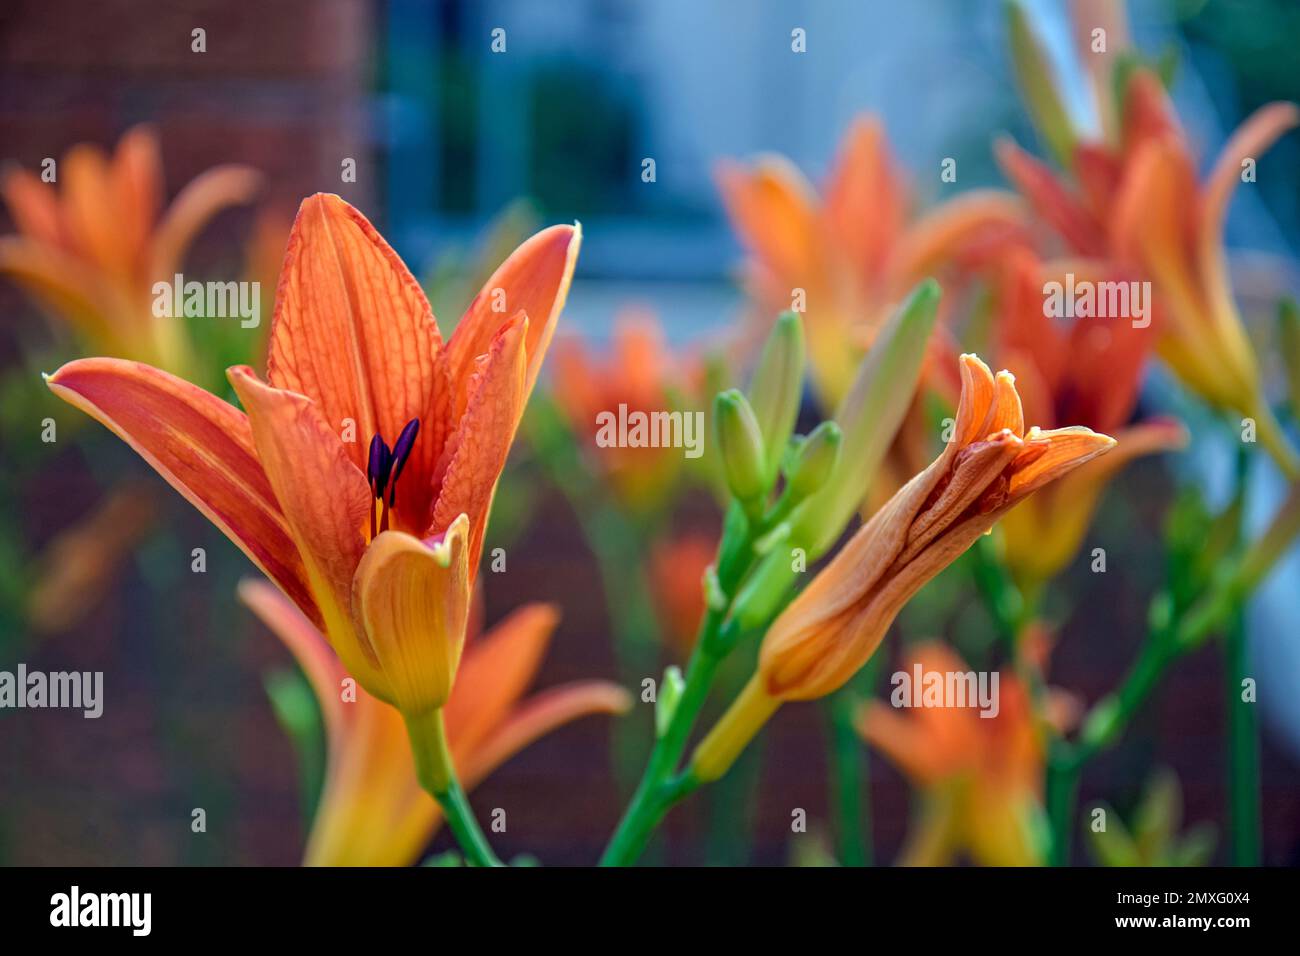 Blooming red lily (Lilium) in garden on blurry background. Beautiful garden plant in flower bed. Close-up. Stock Photo